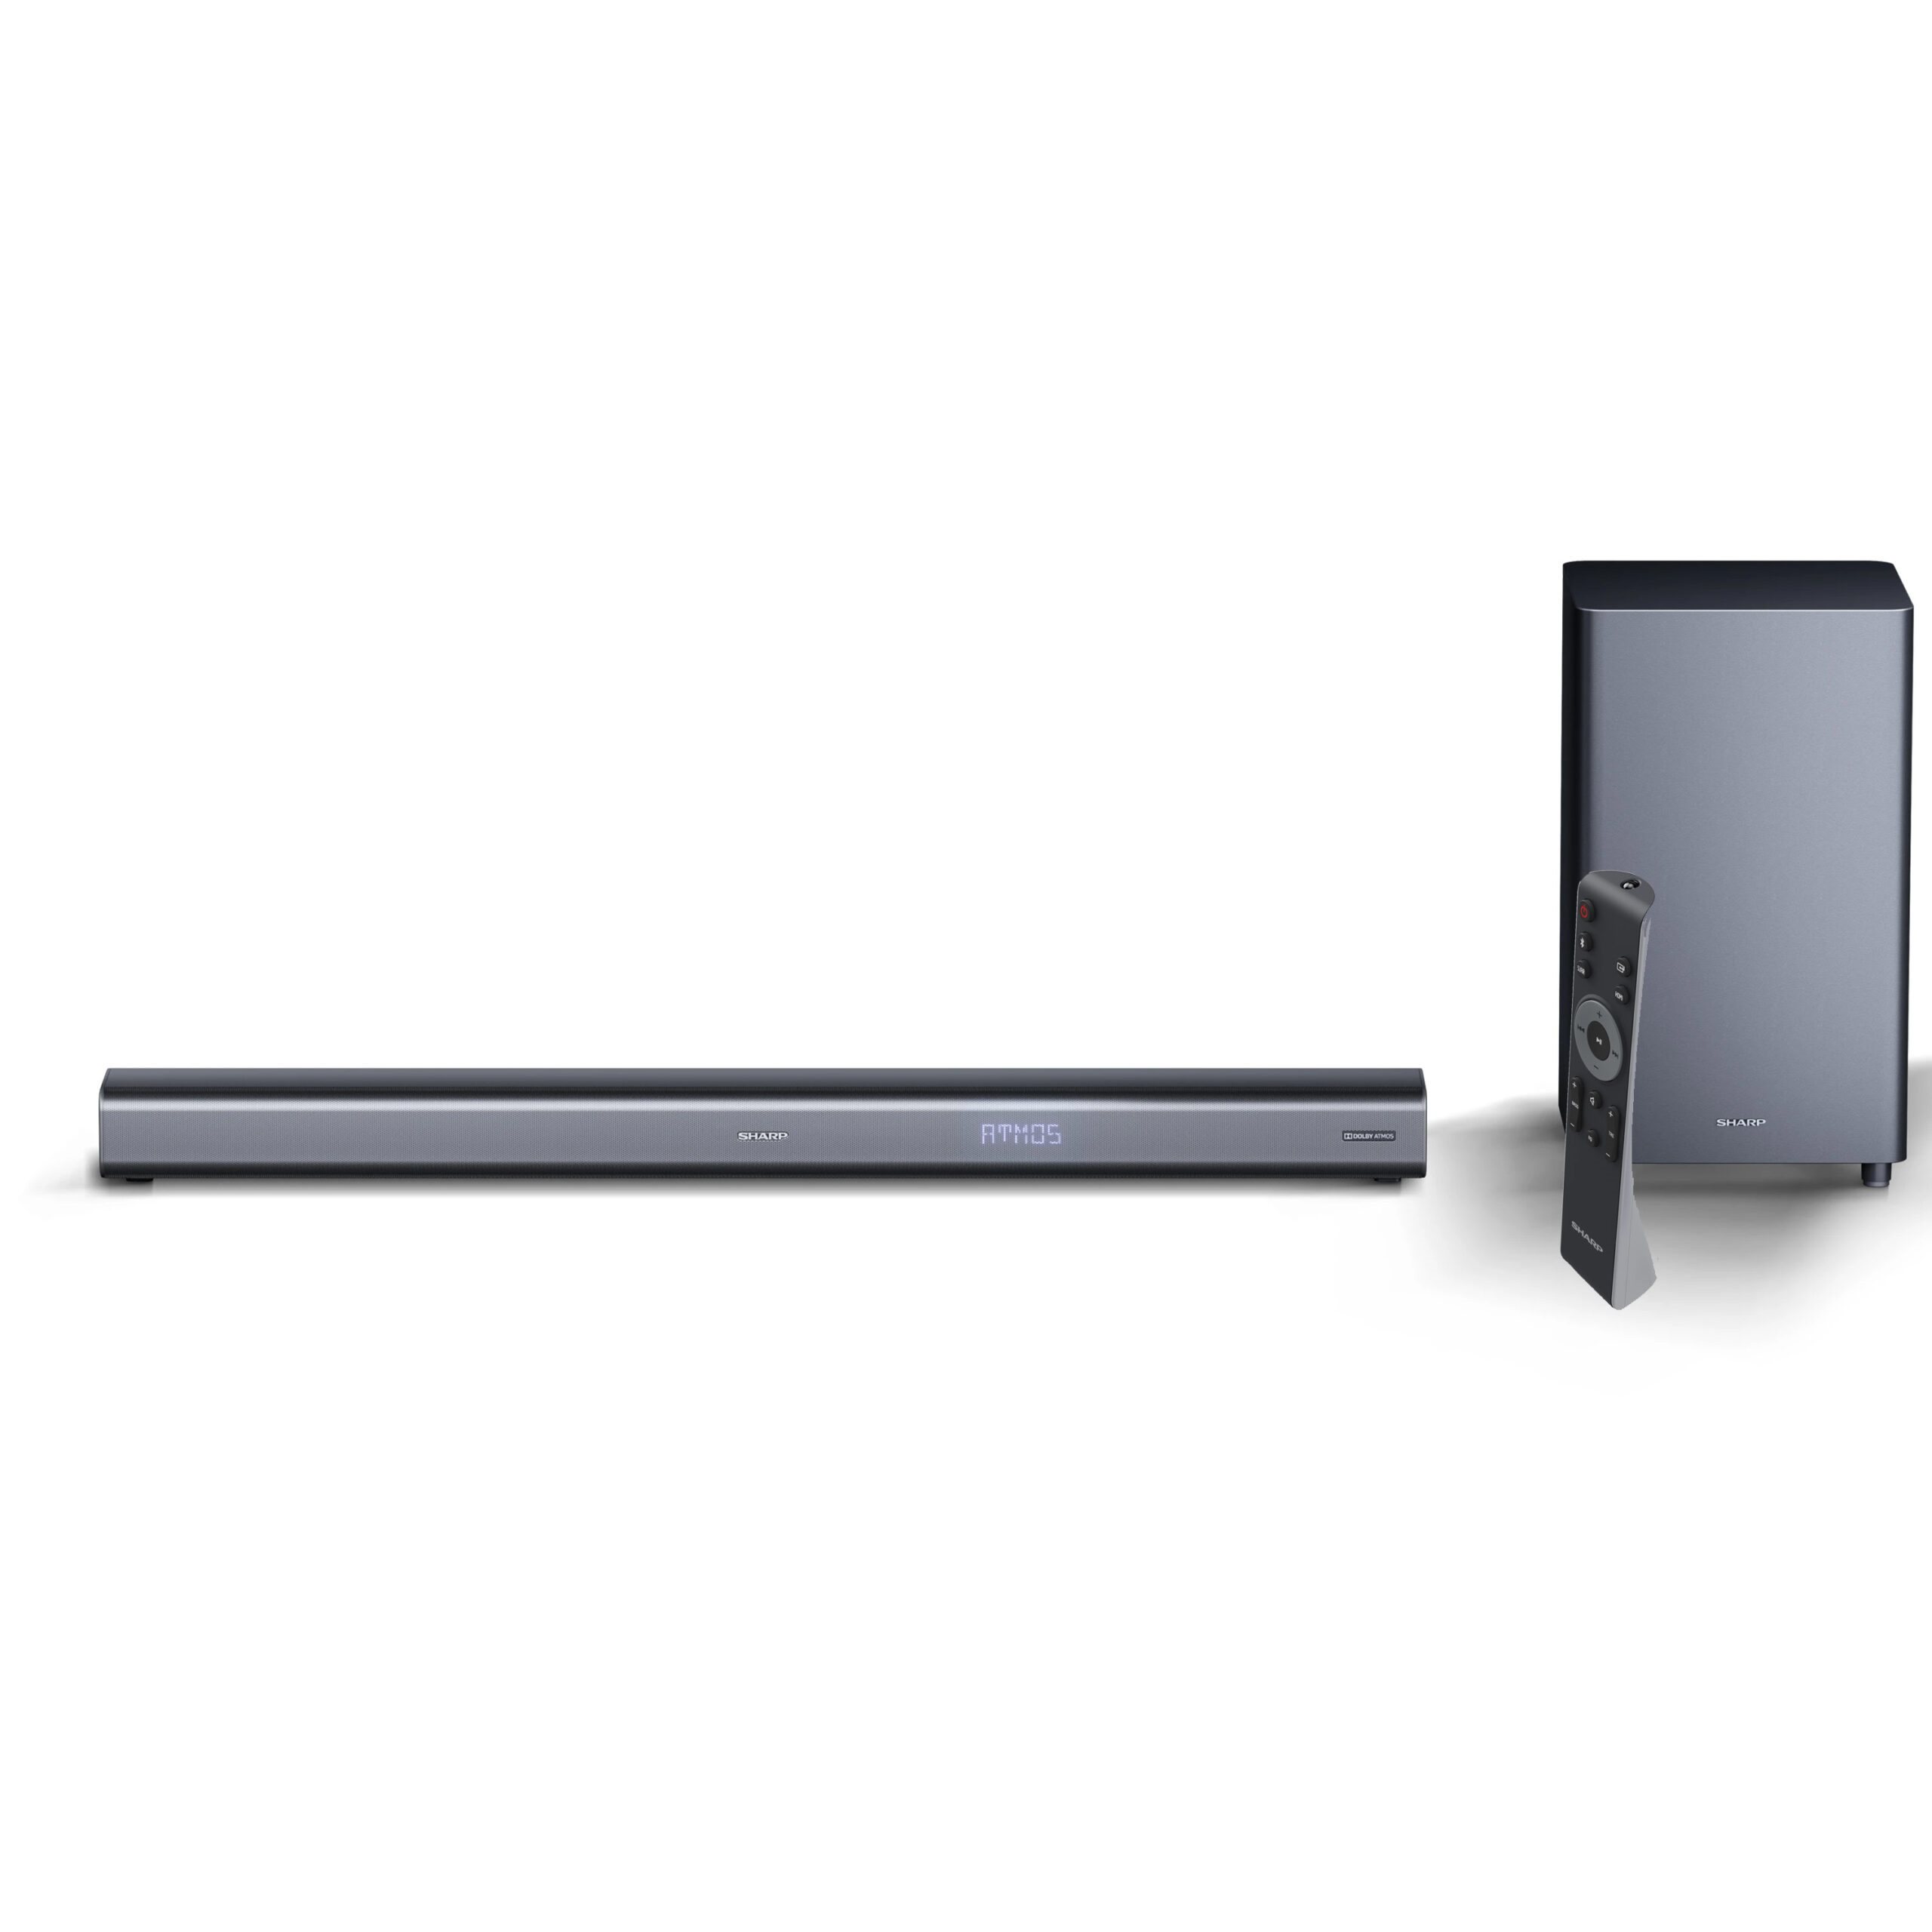 SHARP 3.1CH SOUNDBAR WITH WIRELESS SUBWOOFER AND DOLBY ATMOS HTSBW460